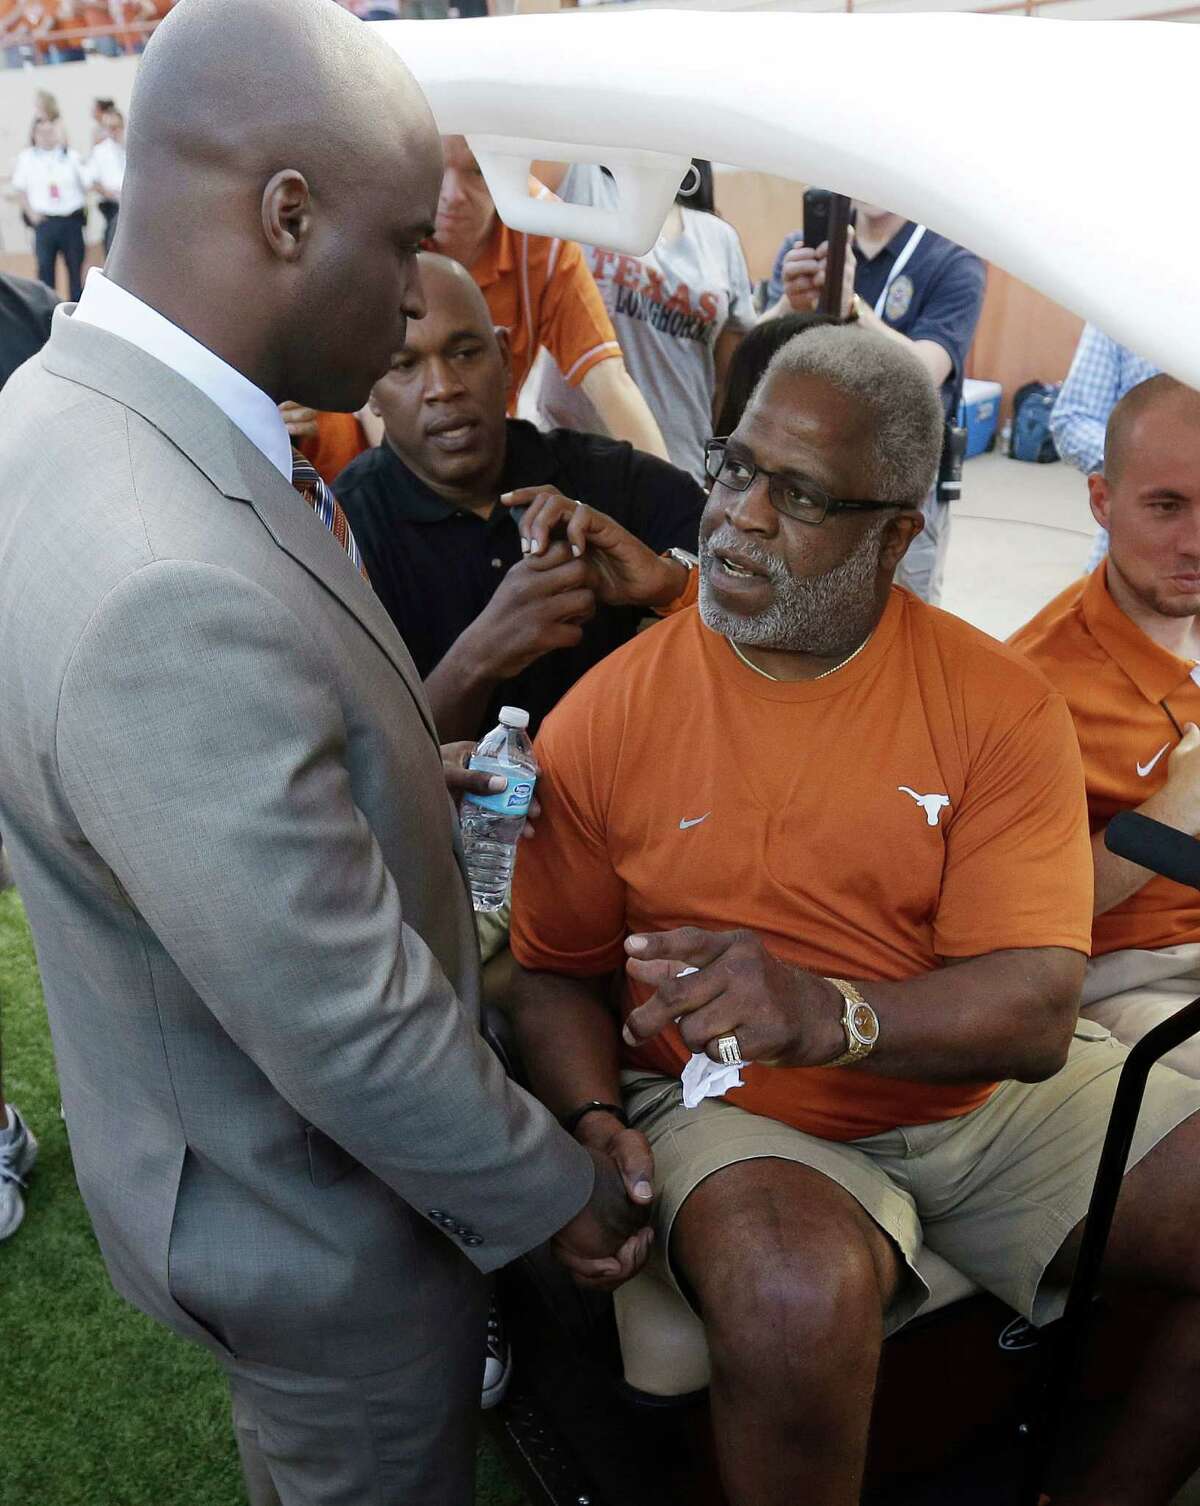 FILE - In this Sept. 8, 2012 file photo, former Texas football player Earl Campbell, right, talks with Ricky Williams, left, as he prepares to take part in the coin flip prior to an NCAA college football game between Texas and New Mexico in Austin, Texas. The NFL Hall of Famer and former Heisman Trophy winner said Tuesday, Sept. 18, 2012, he is undergoing nerve treatment after doctors ruled out concerns that he might have Lou Gehrigís disease. (AP Photo/Eric Gay)